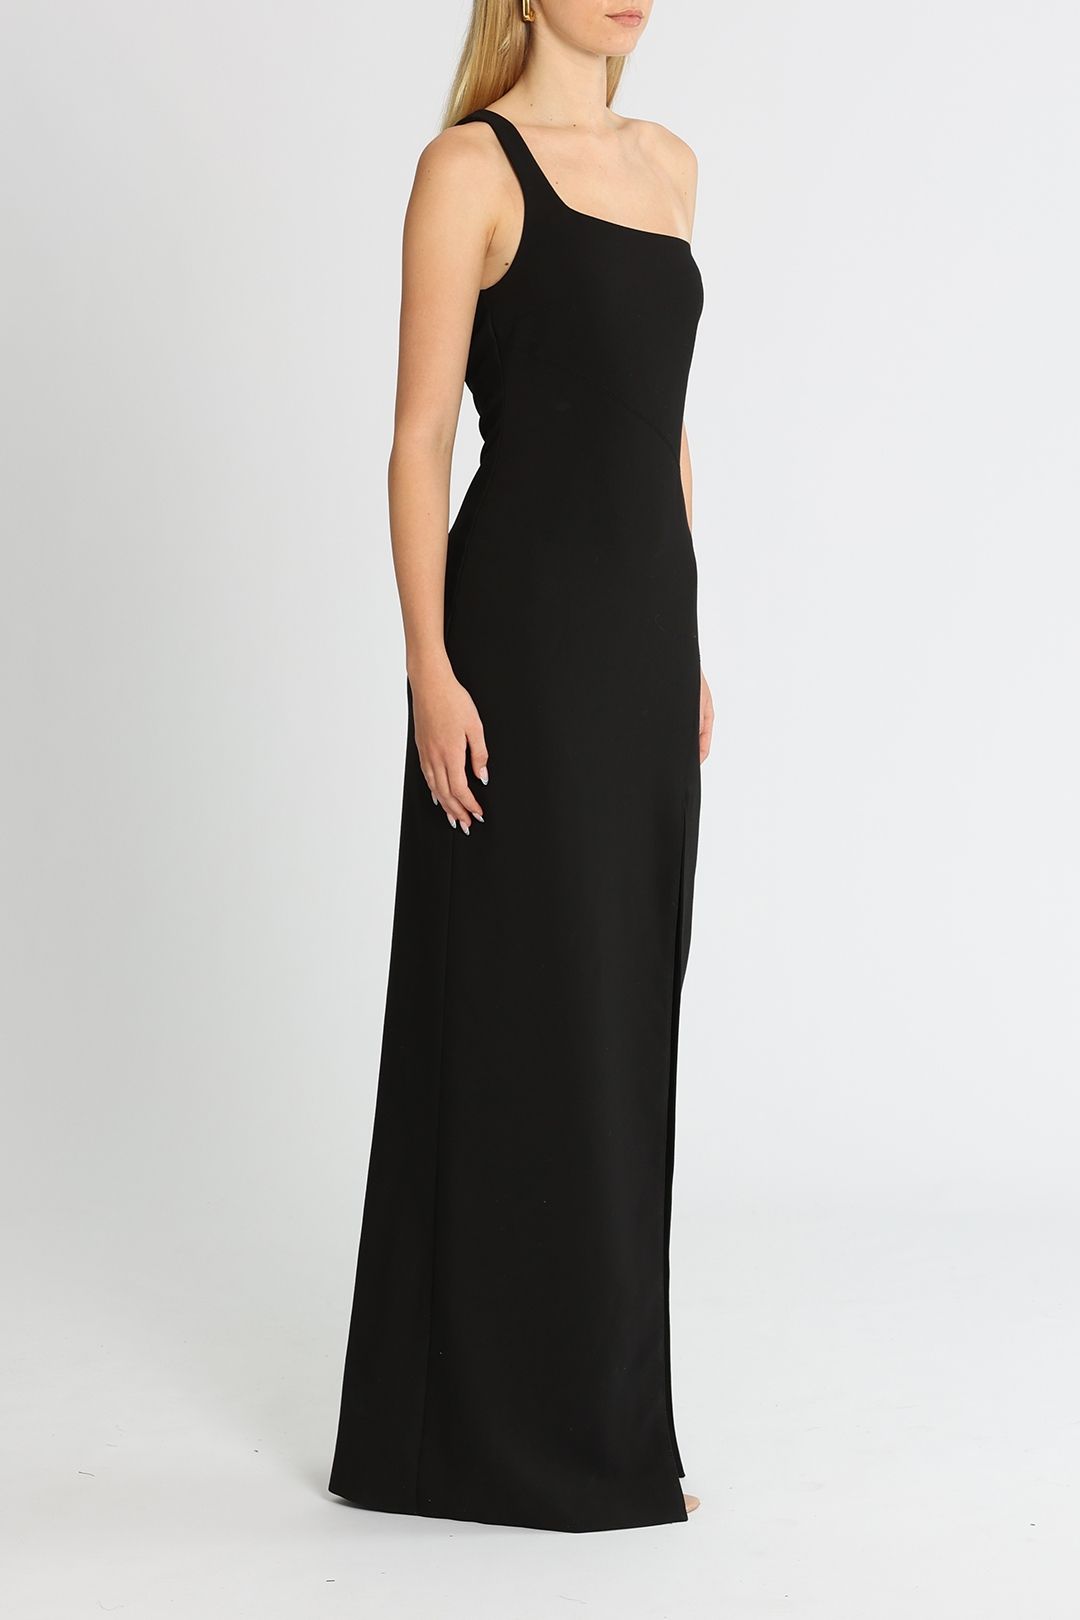 Likely NYC Camden Gown Black Floor Length